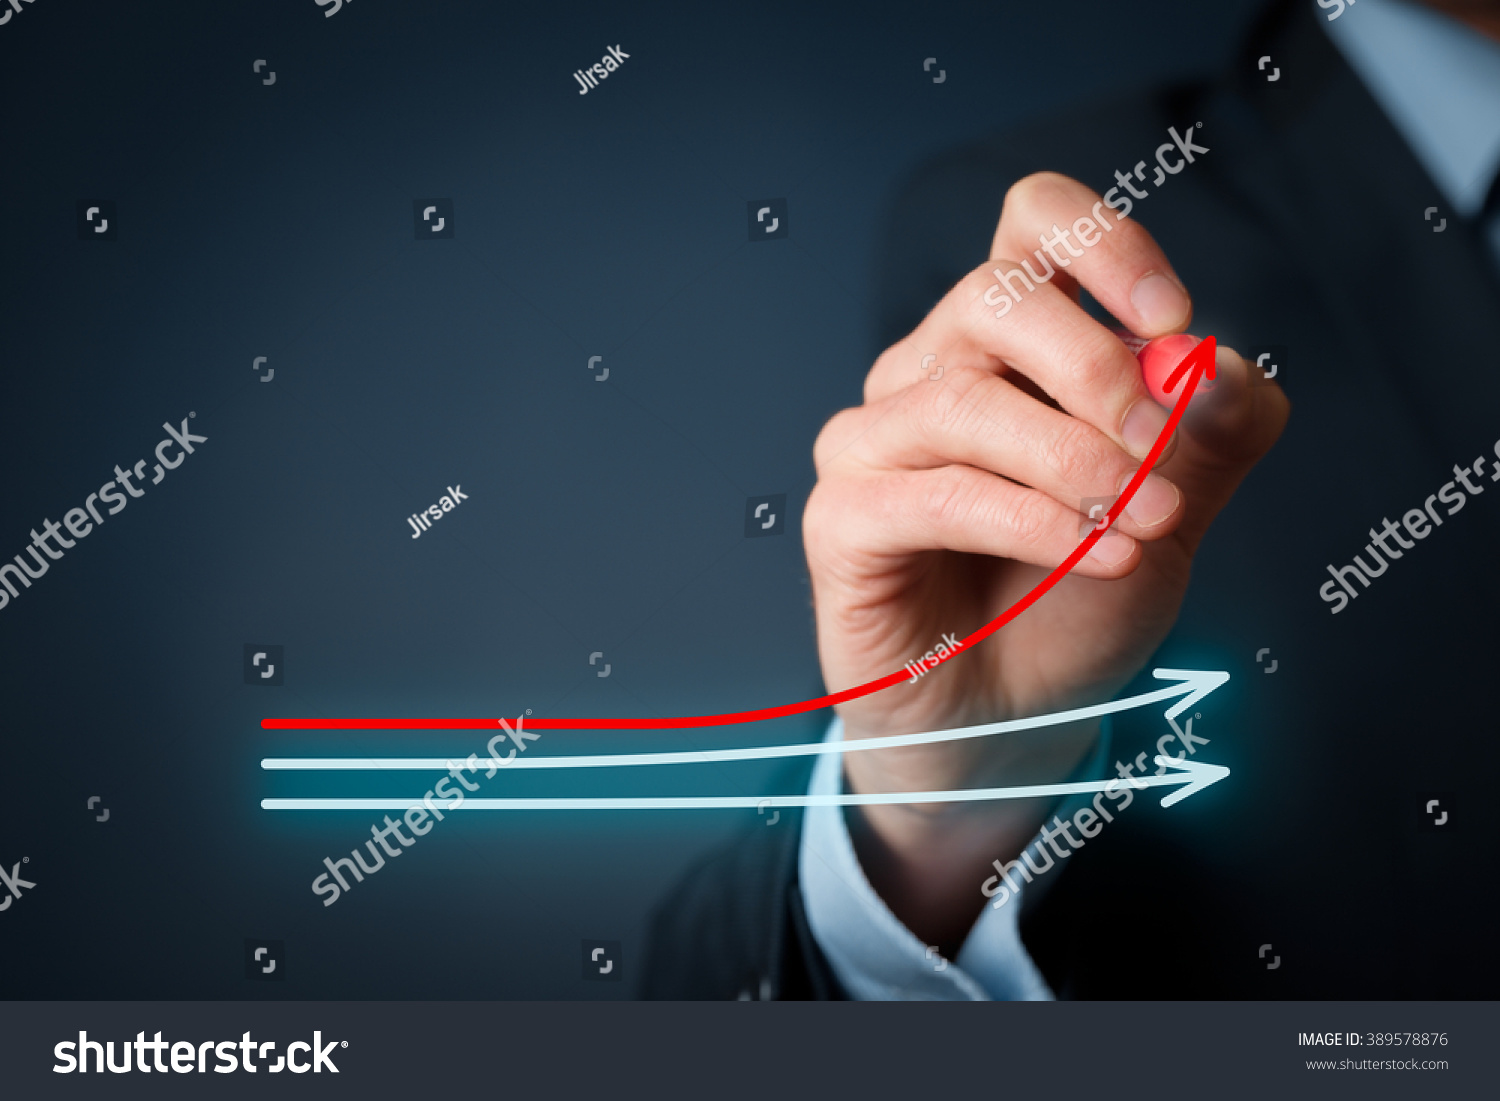 Benchmarking and market leader concept. Manager (businessman, coach, leadership) draw graph with three lines, one of them represent the best company in competition.
 #389578876